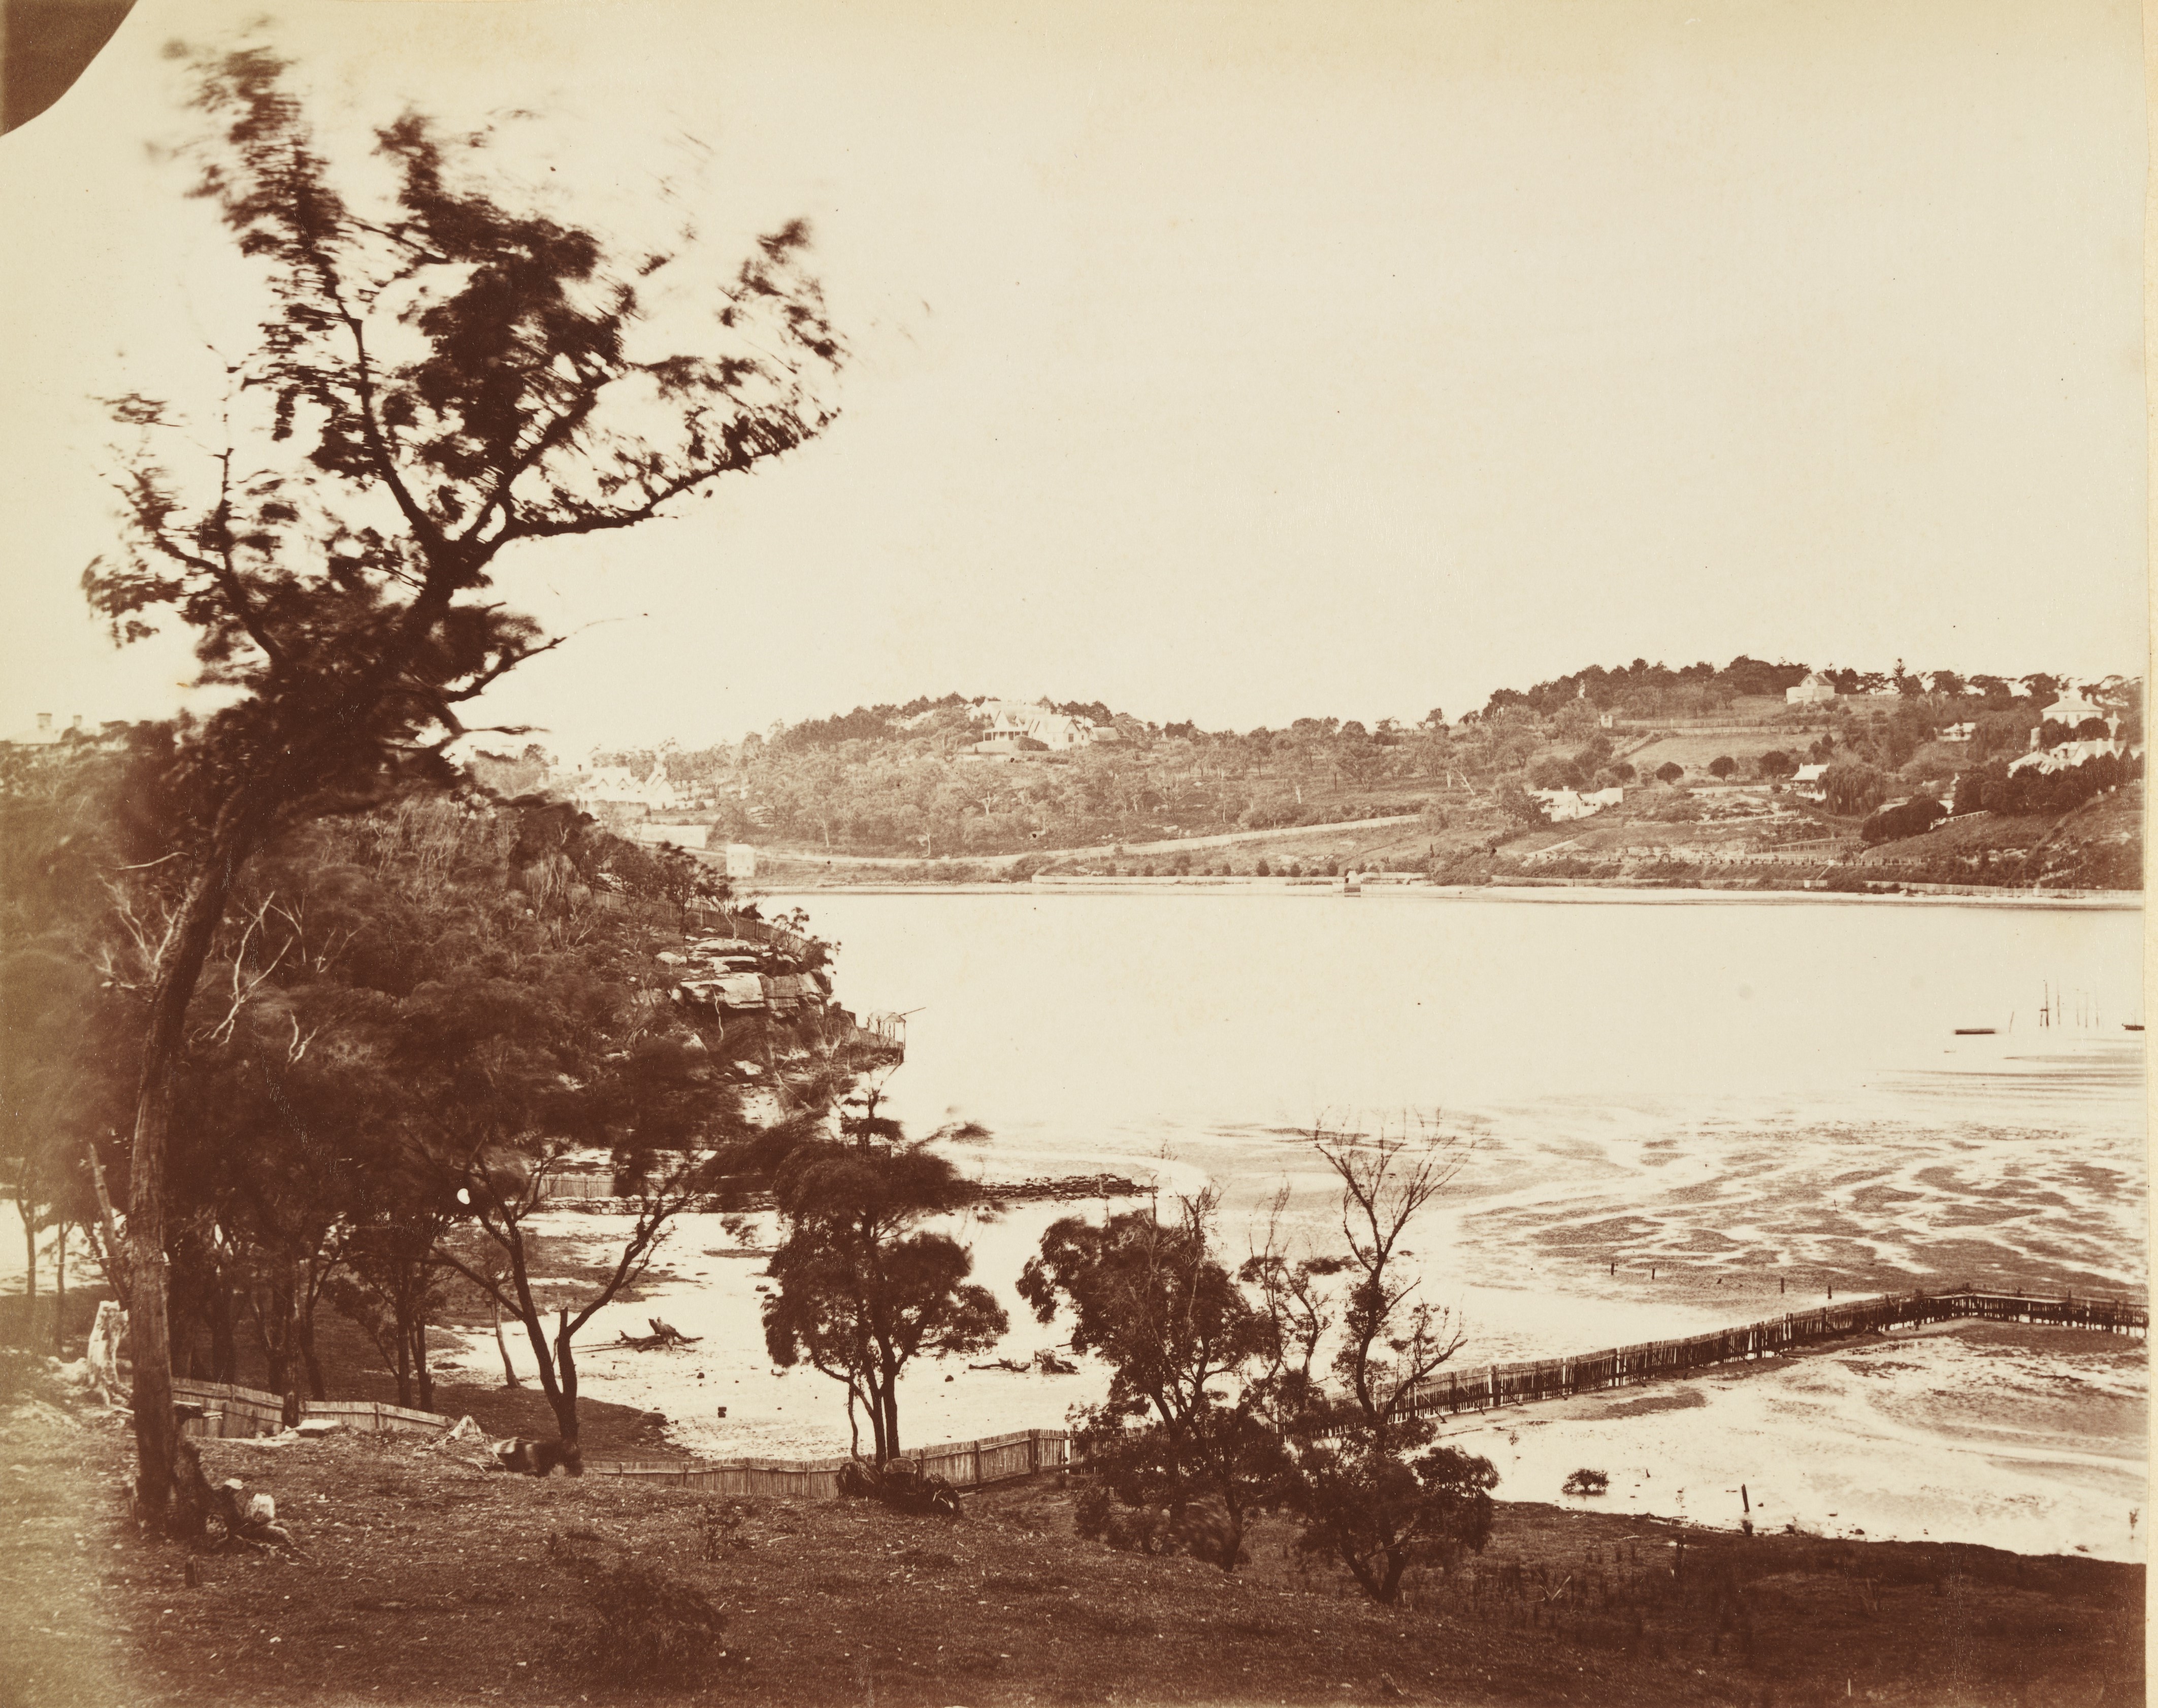 Photograph of Rushcutters Bay